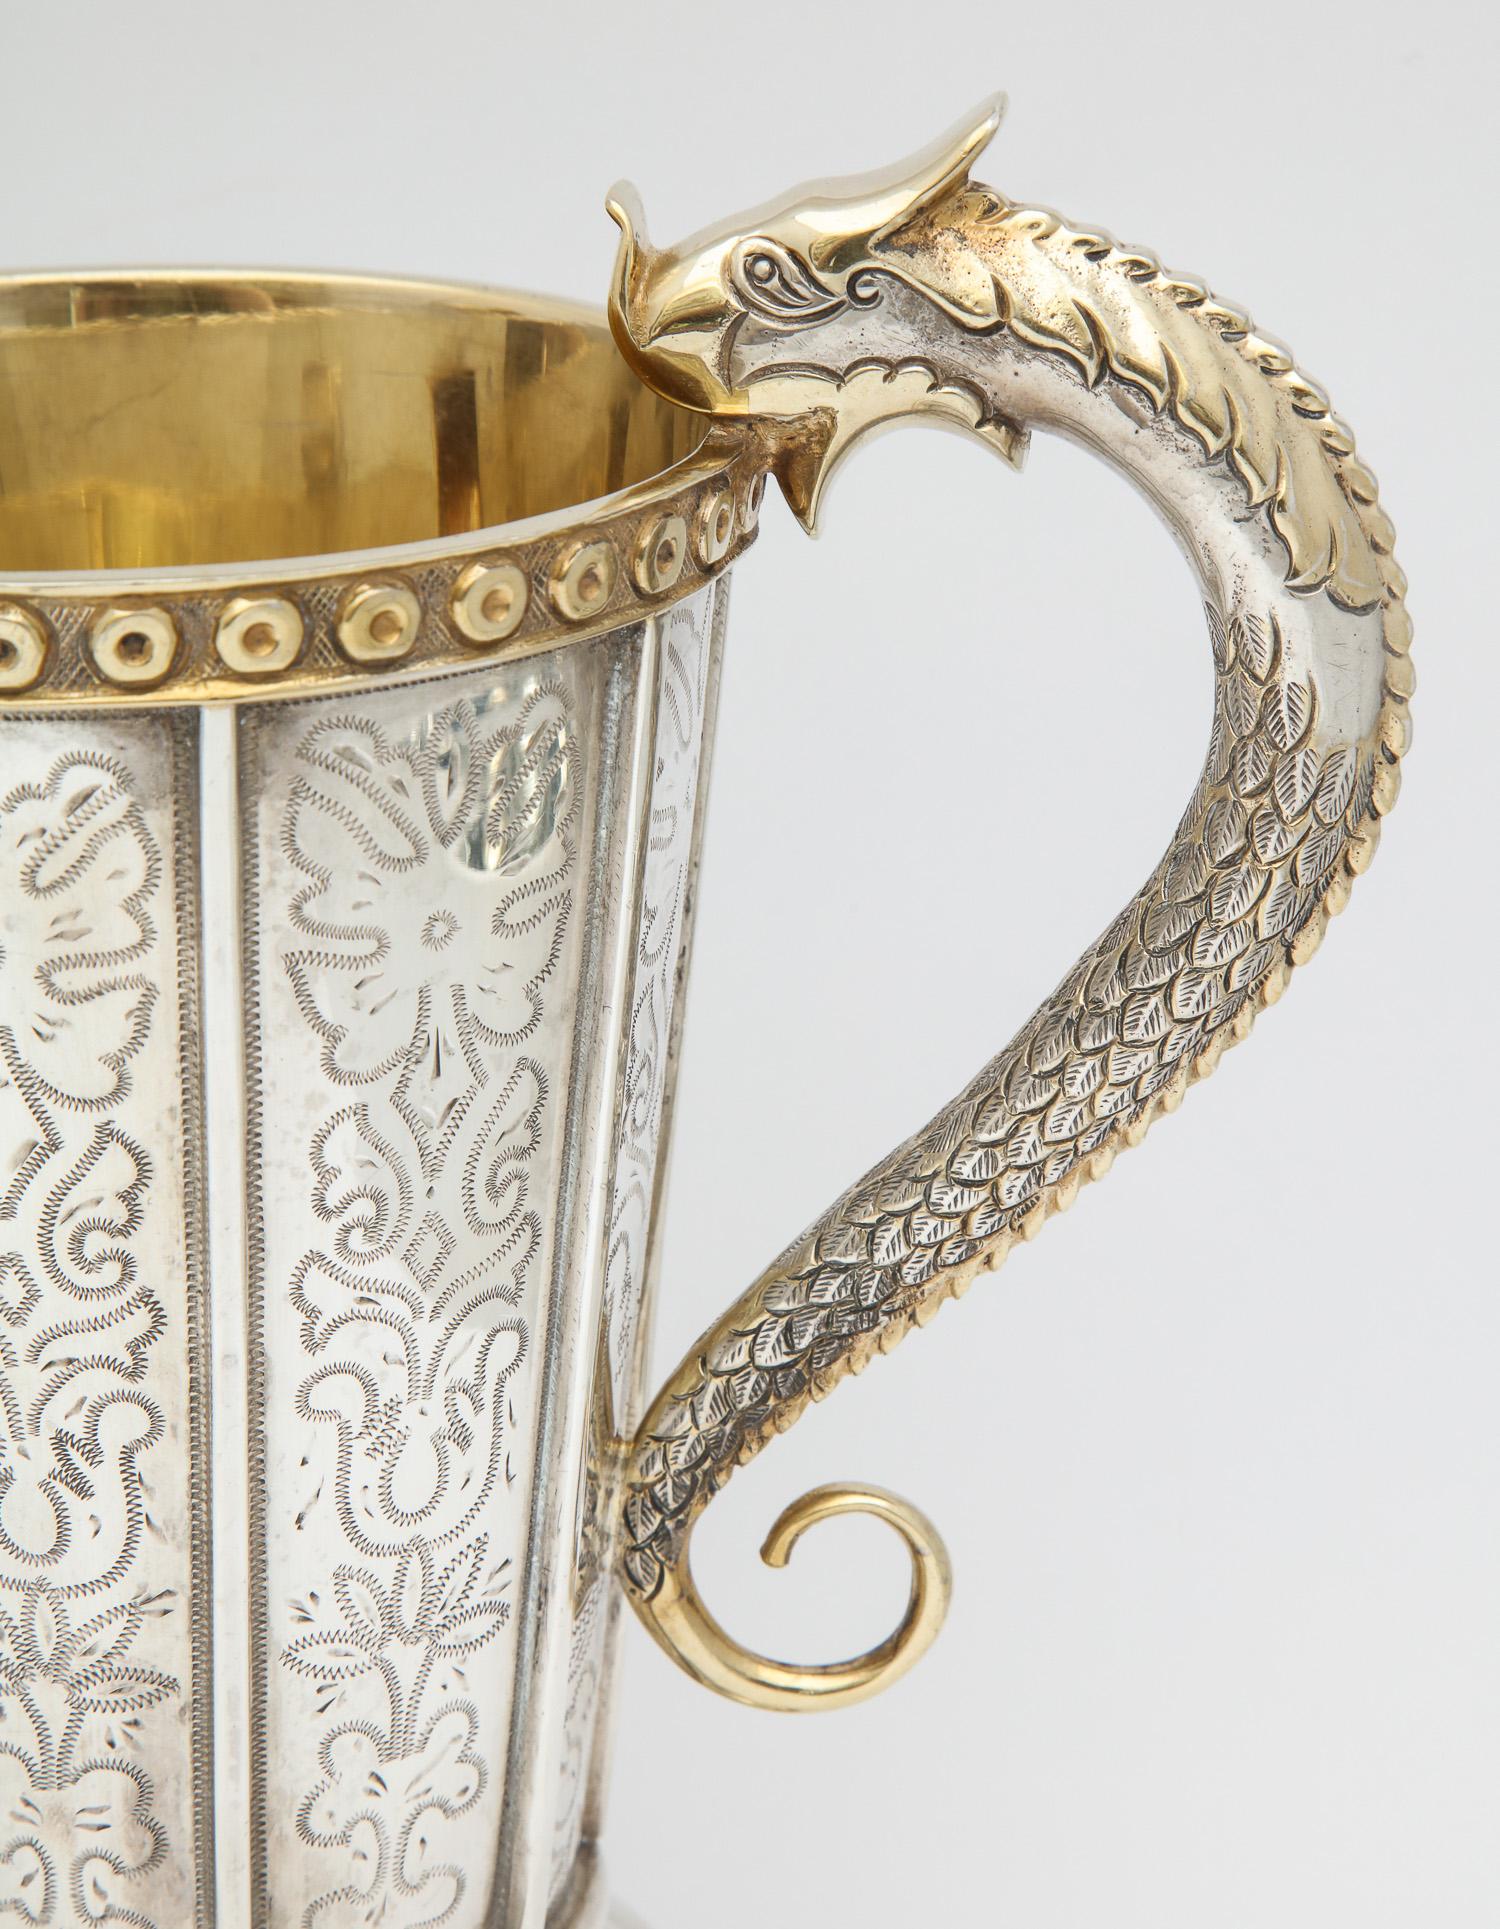 Quetzalcoatl - inspired, sterling silver parcel gilt pitcher, Mexico City, circa 1950's, Tane-maker. Quetzalcoatl was the most important Mayan god, being the creator of the world, humanity and god of the winds and rain. Pitcher has an etched design,